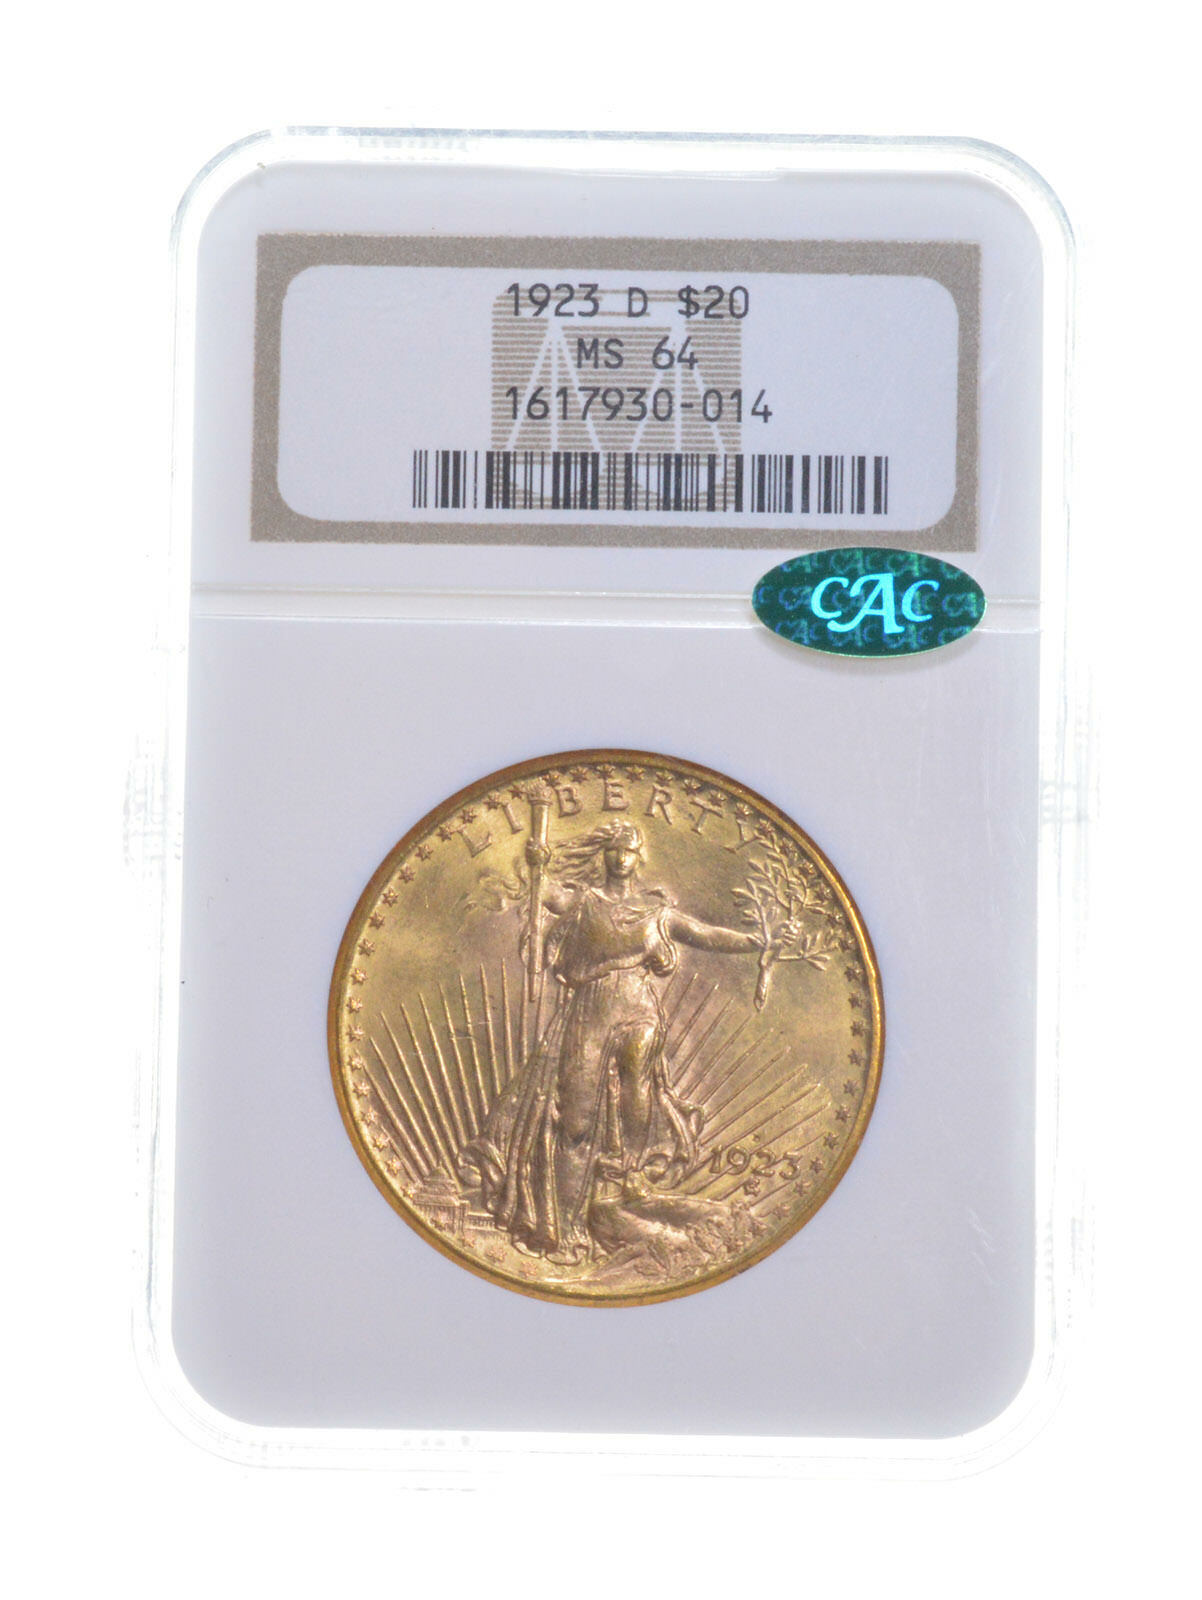 MS64 1923-D $20 Saint-Gaudens Gold Double Eagle - CAC - Graded N